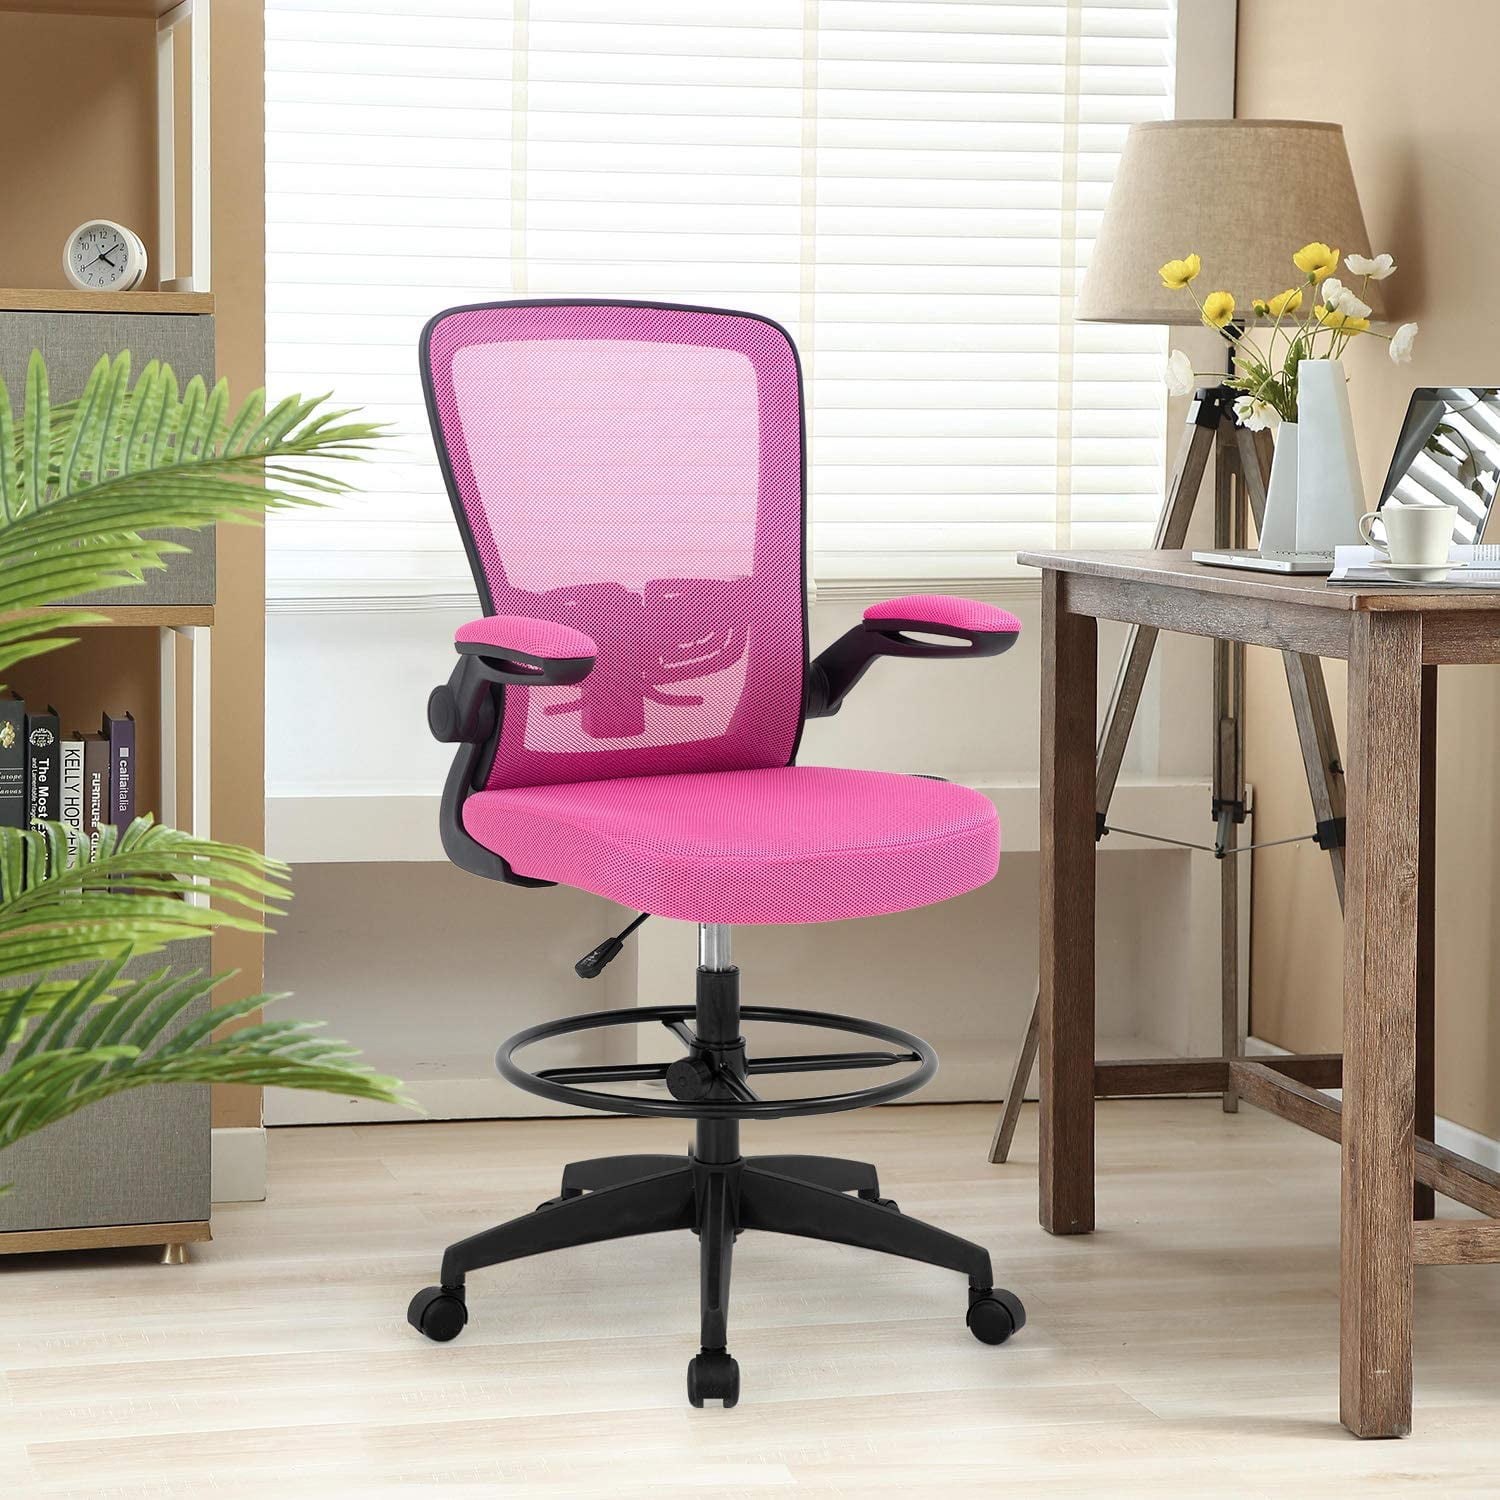 Drafting Chair Tall Office Chair Adjustable Height with Lumbar Support Flip Up 